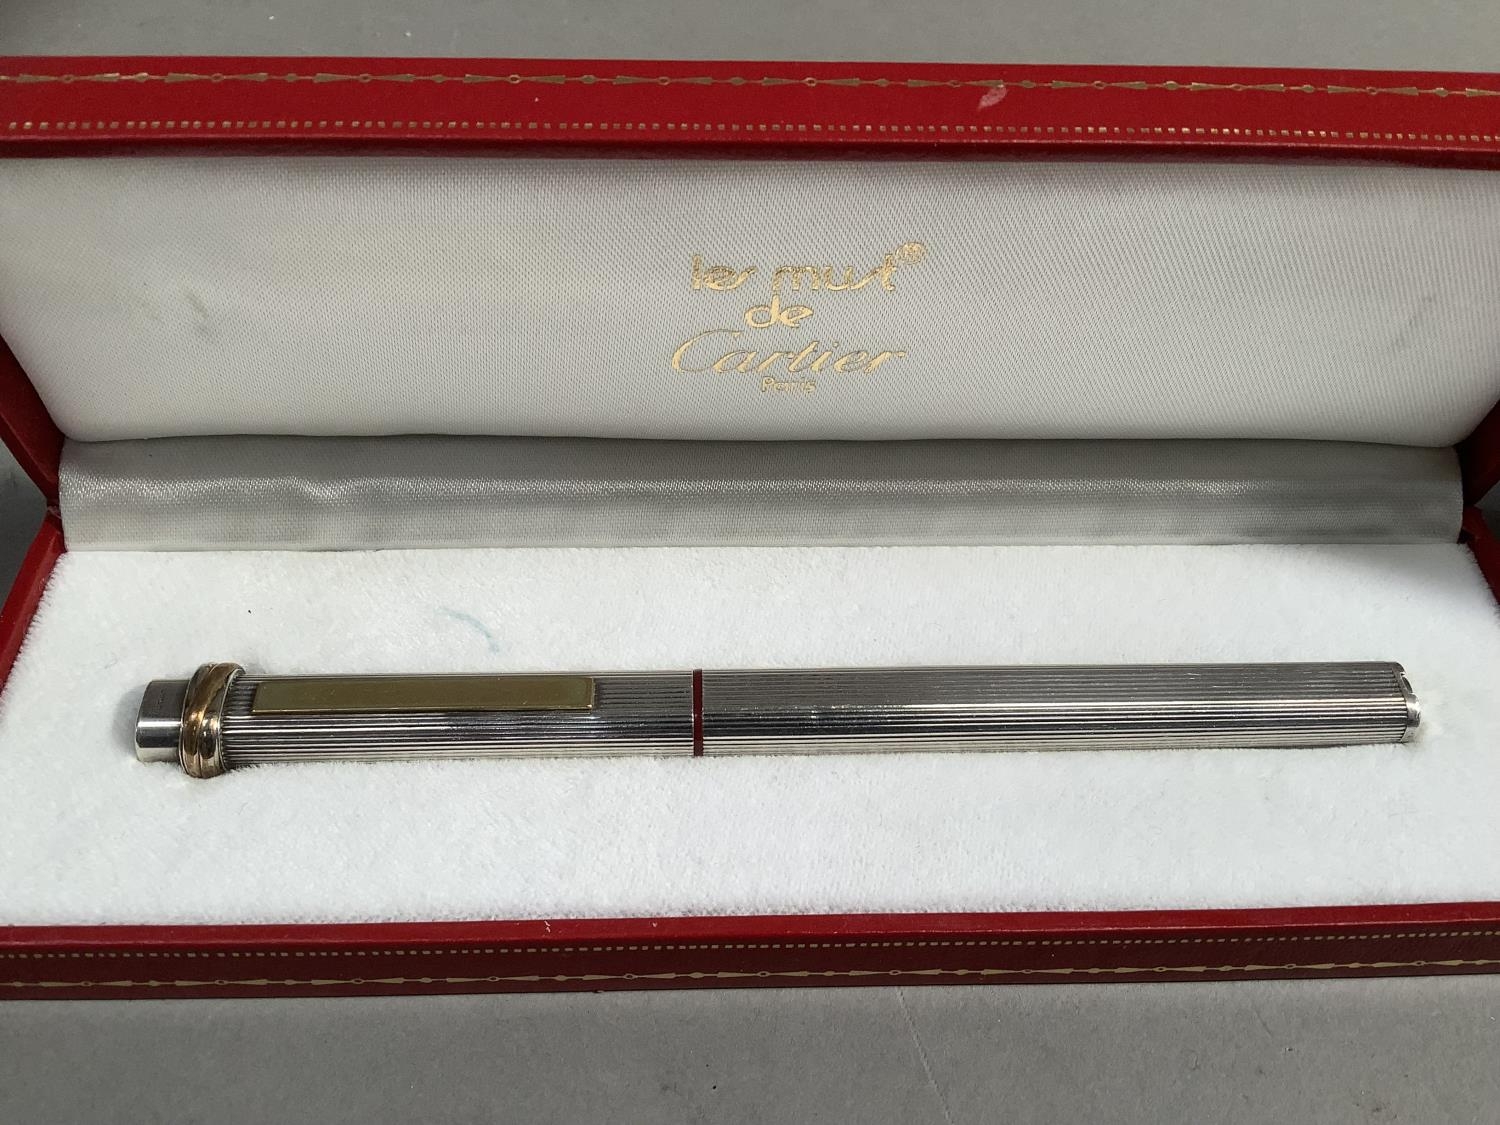 A Le Must de Cartier ball point pen with 18ct gold nib, in case with outer sleeve; together with - Image 2 of 3